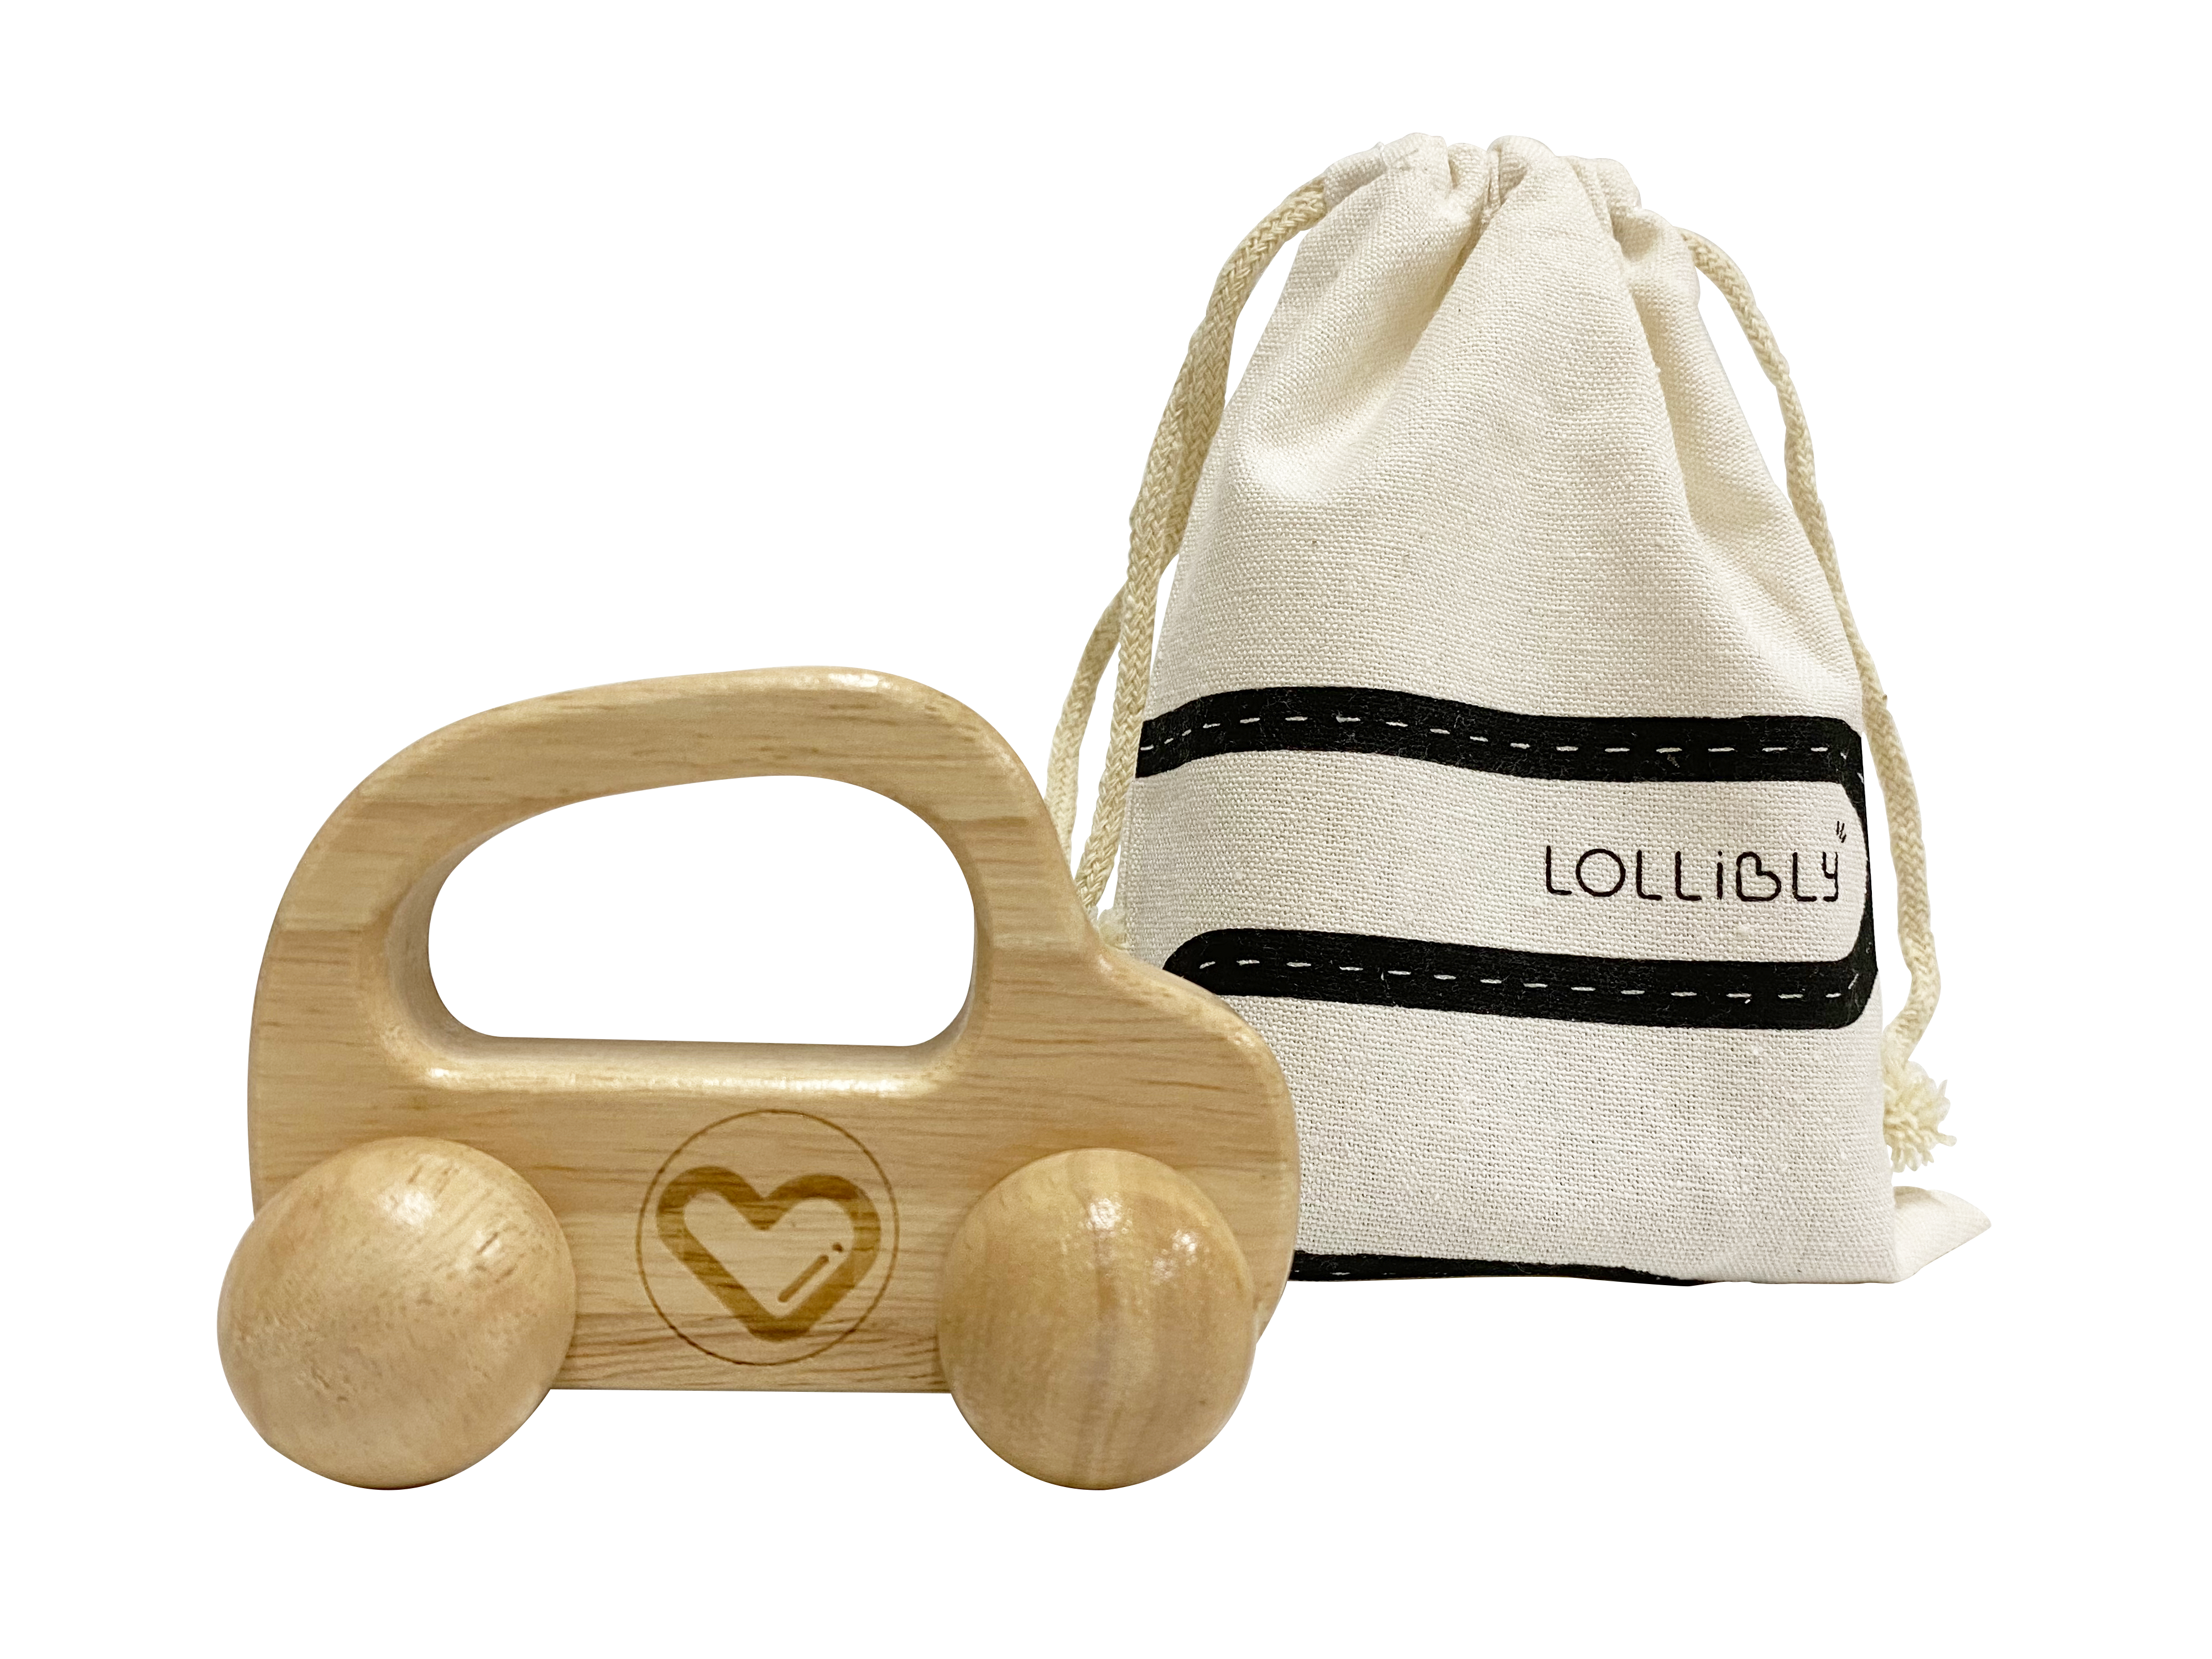 Lollibly Wooden Toy Car & Drawstring Bag